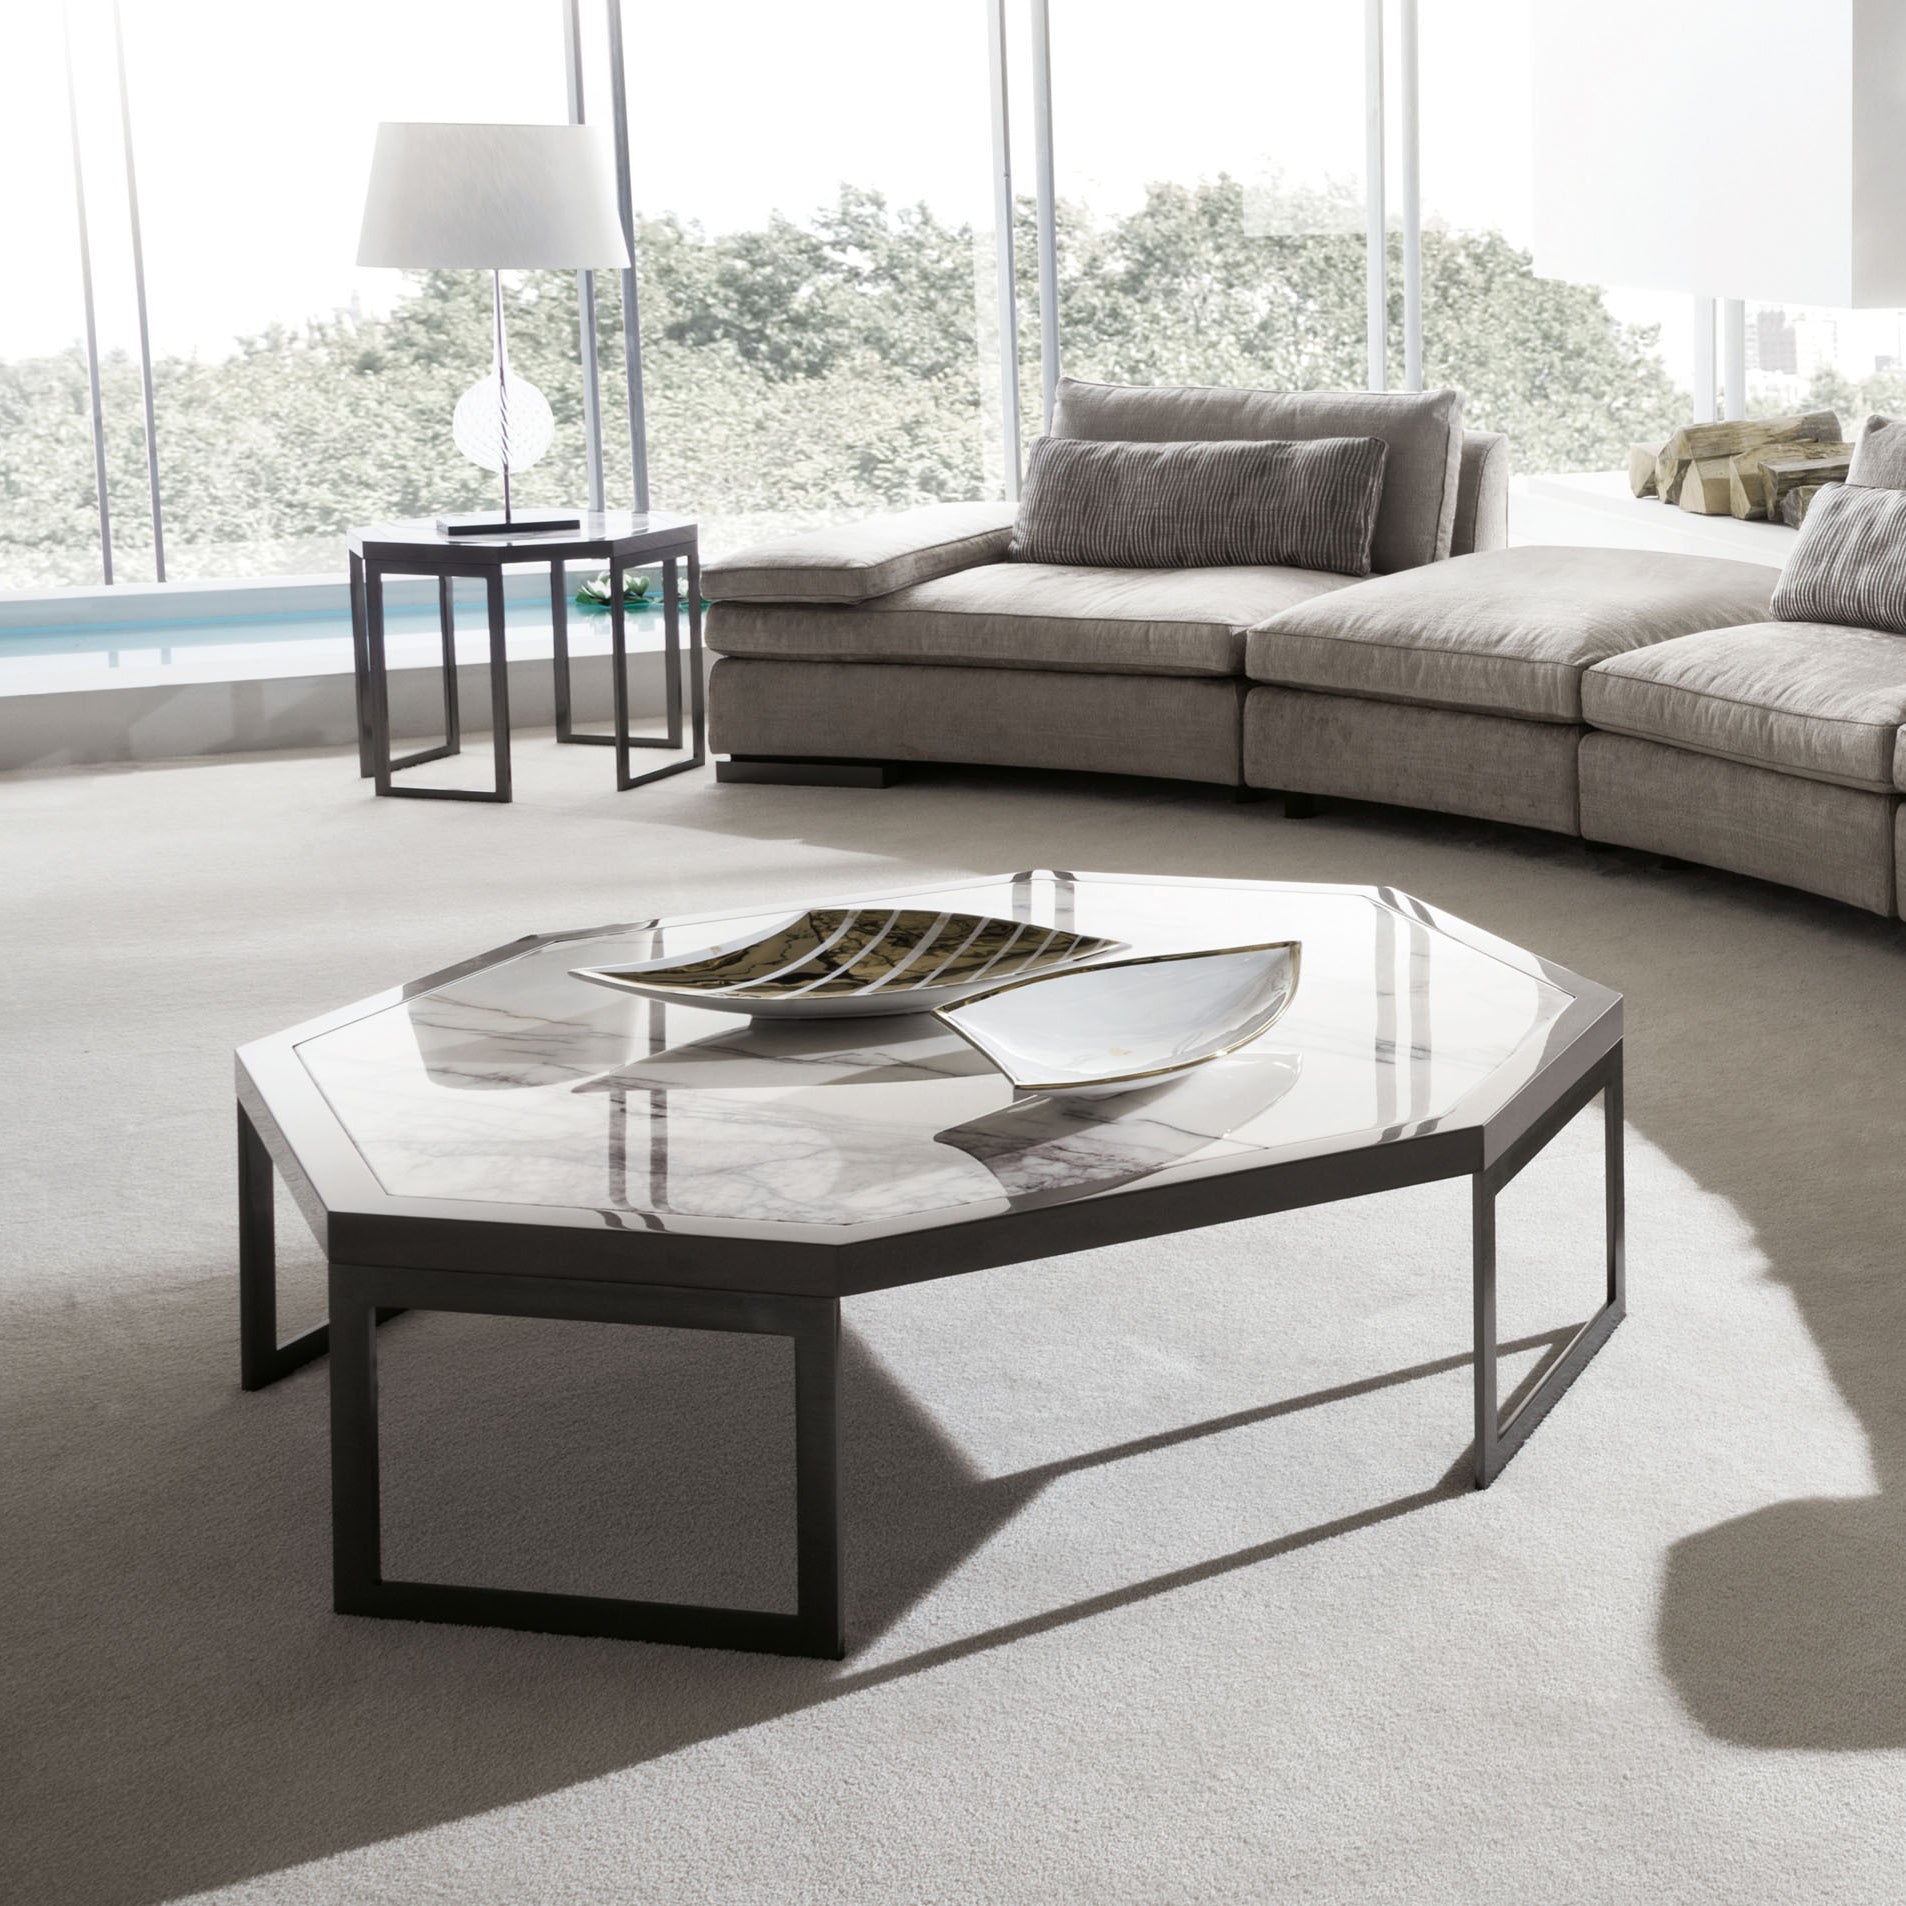 VISION-coffee-table2